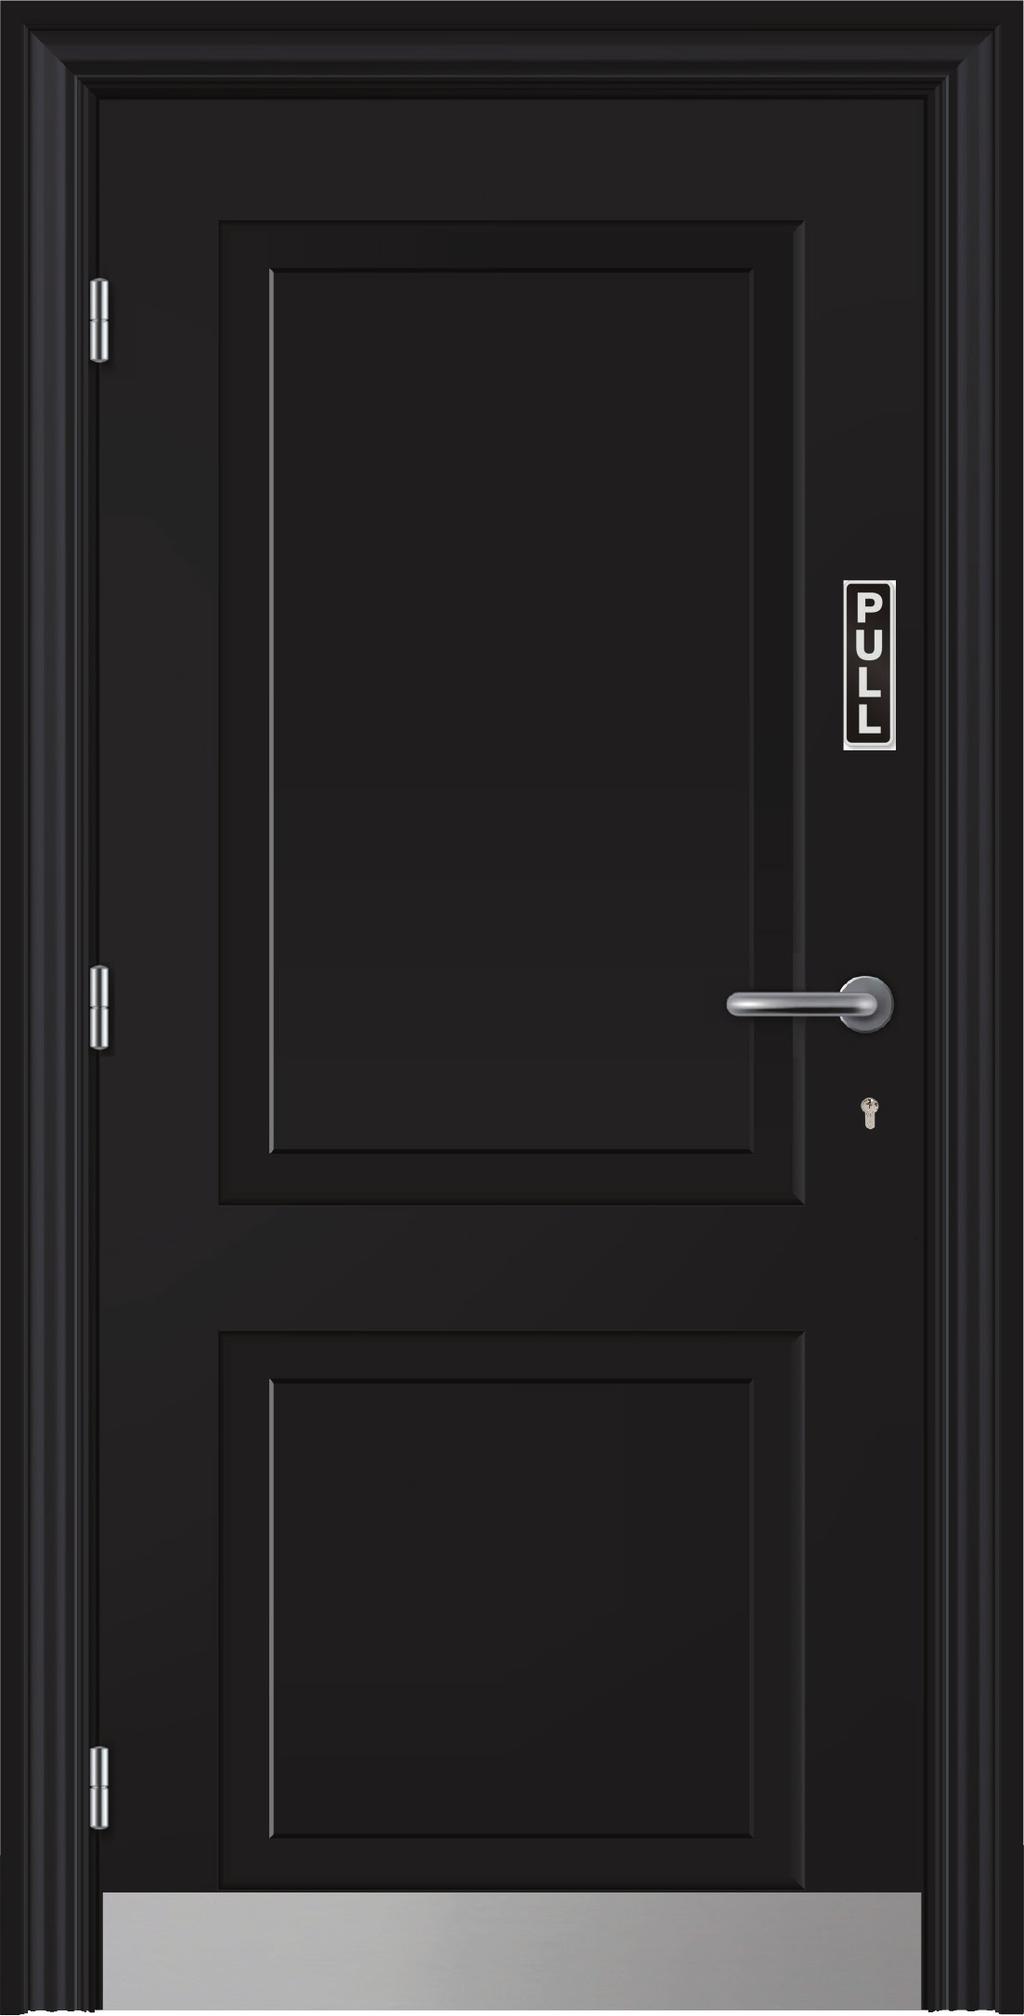 ASSA ABLOY s door hardware products are ideal for a wide range of situations from private homes to the commercial or public sector and for heavy or lightweight doors.